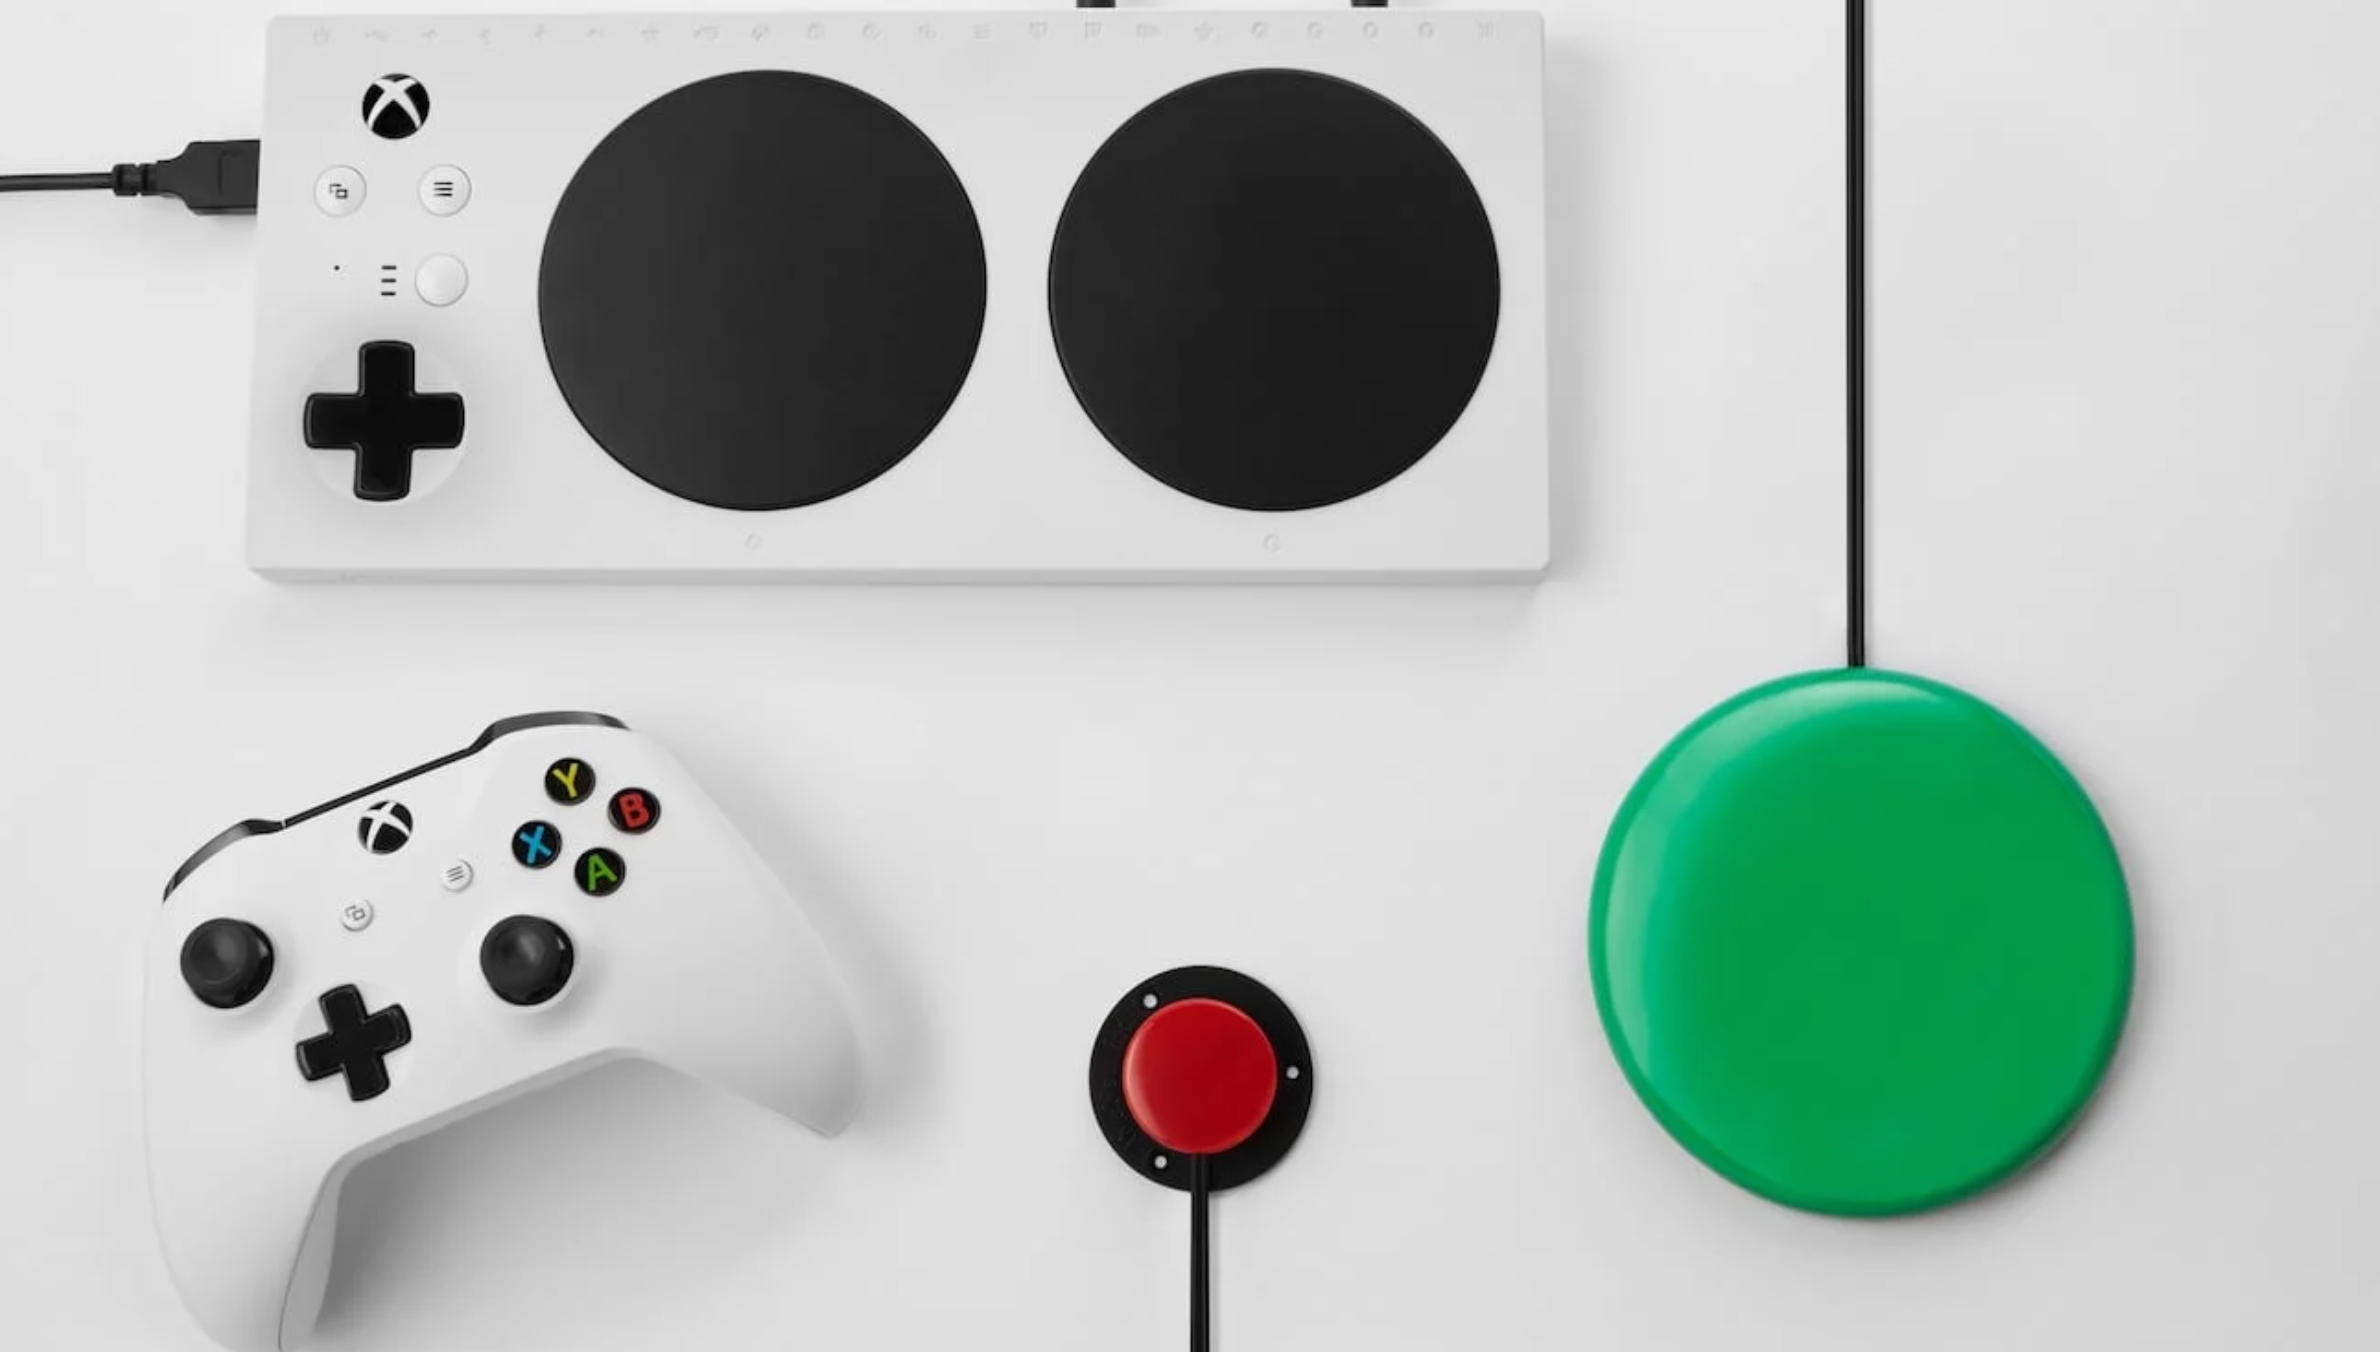 A collection of controllers including the Xbox Adaptive Control, a small red switch, a large green switch, and a standard Xbox Controller.